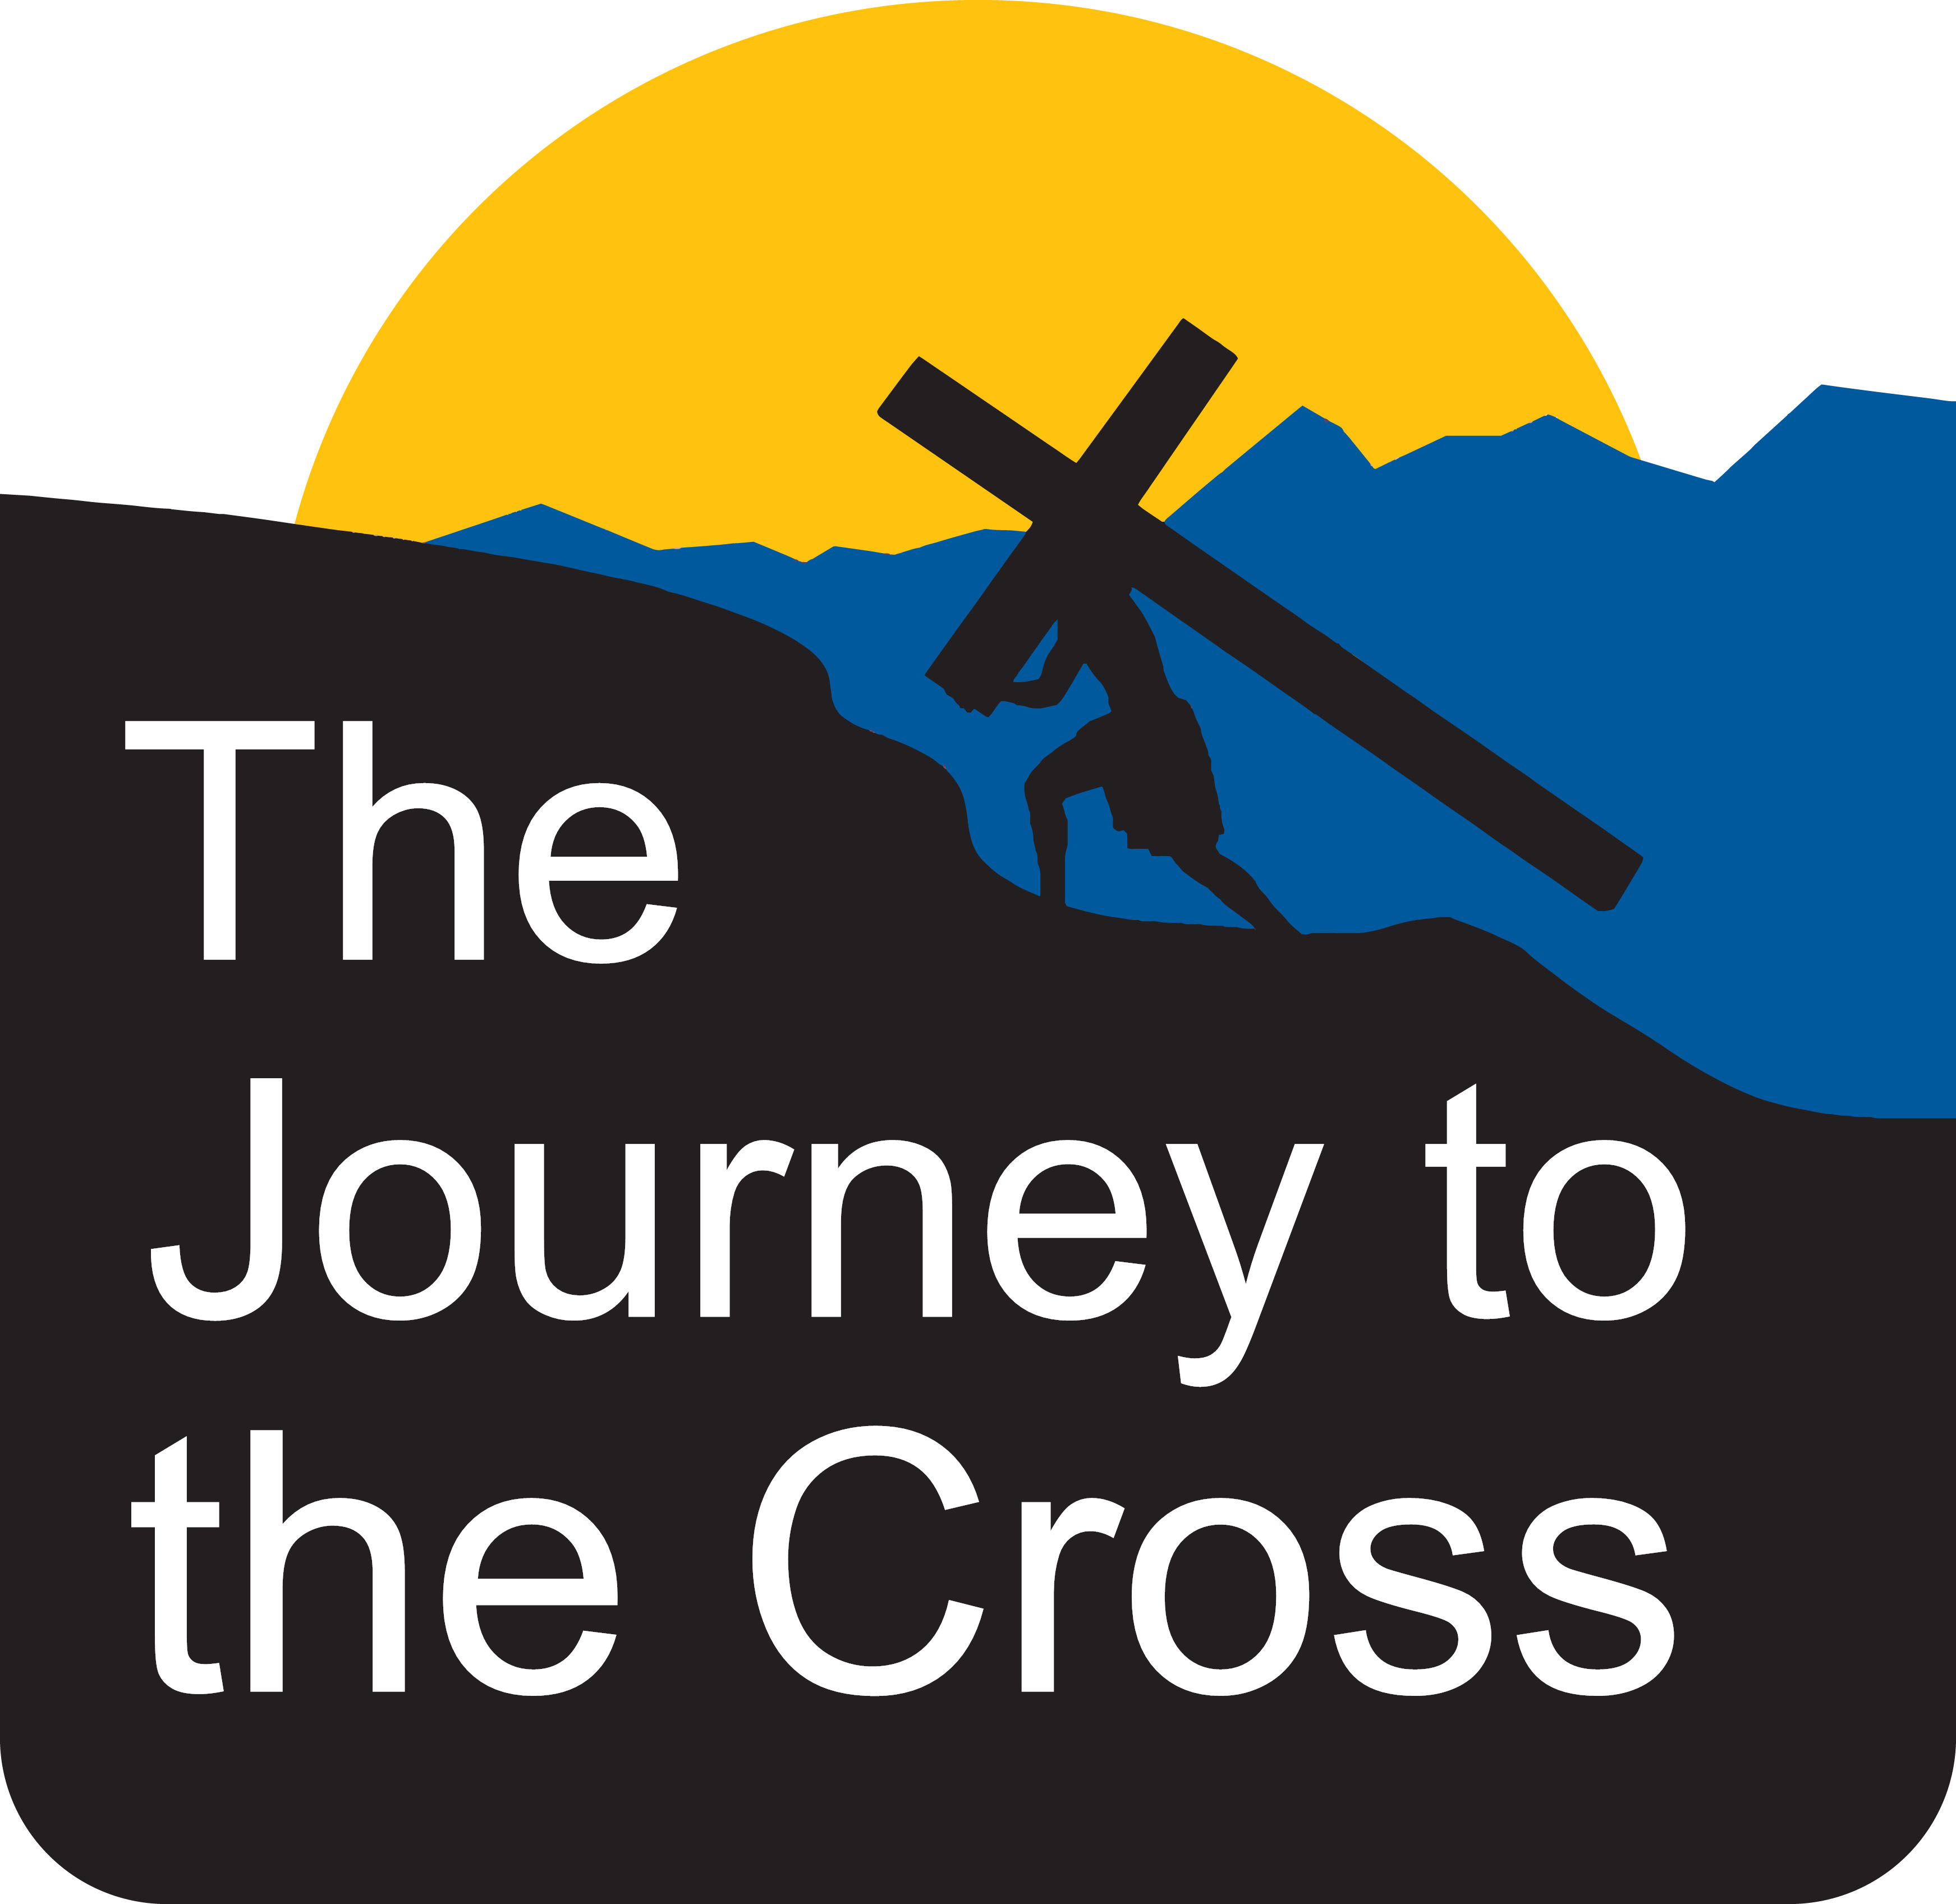 The journey to the cross text overlaying a silhouette of person carrying a cross up a rugged hill with sun peeking over the hill